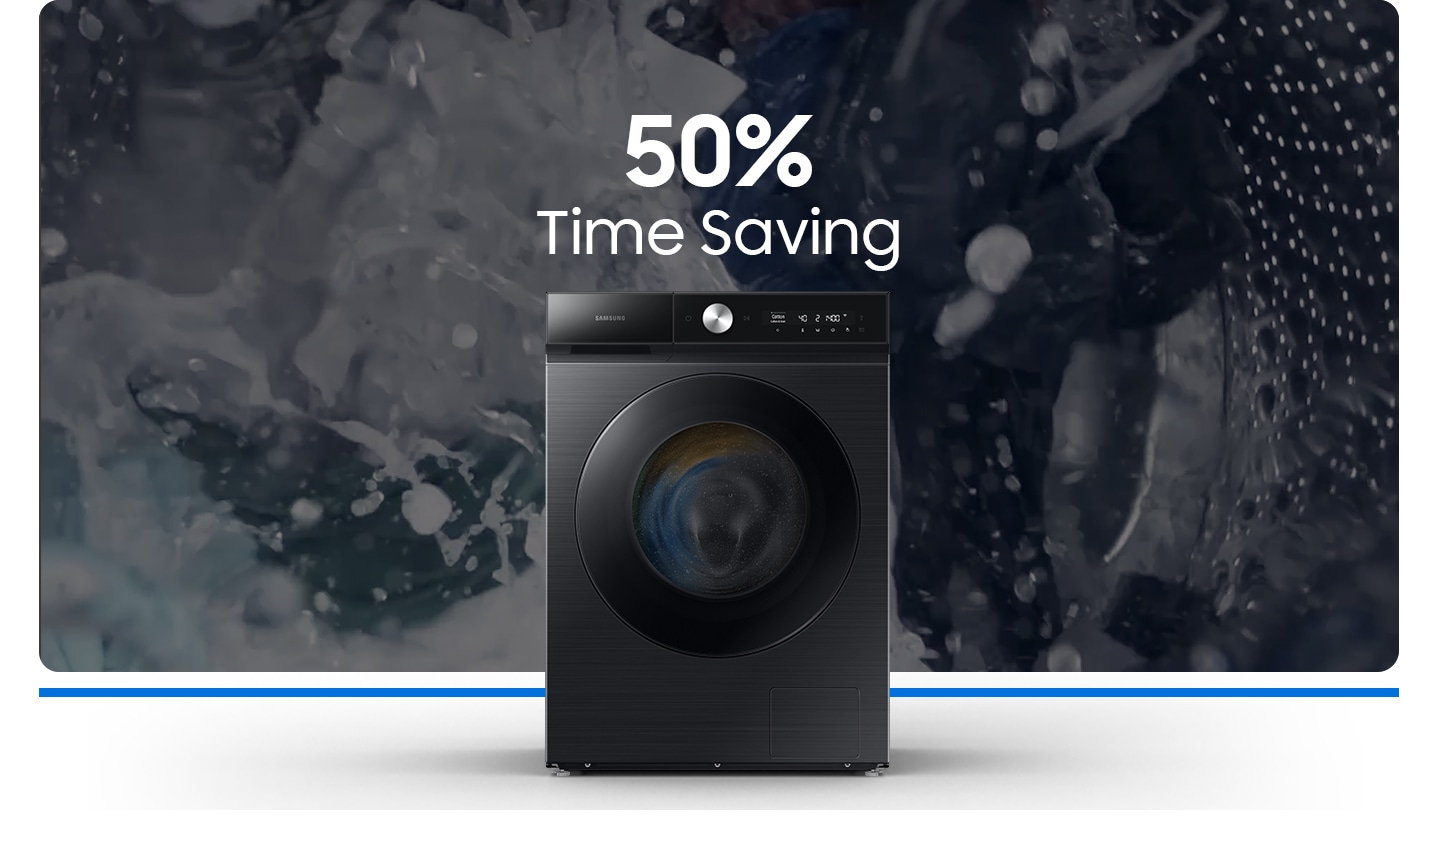 The powerful water is sprayed, bubbles are formed, and clothes are washed. The “50% time saving” text appears on the top of the washing machine.